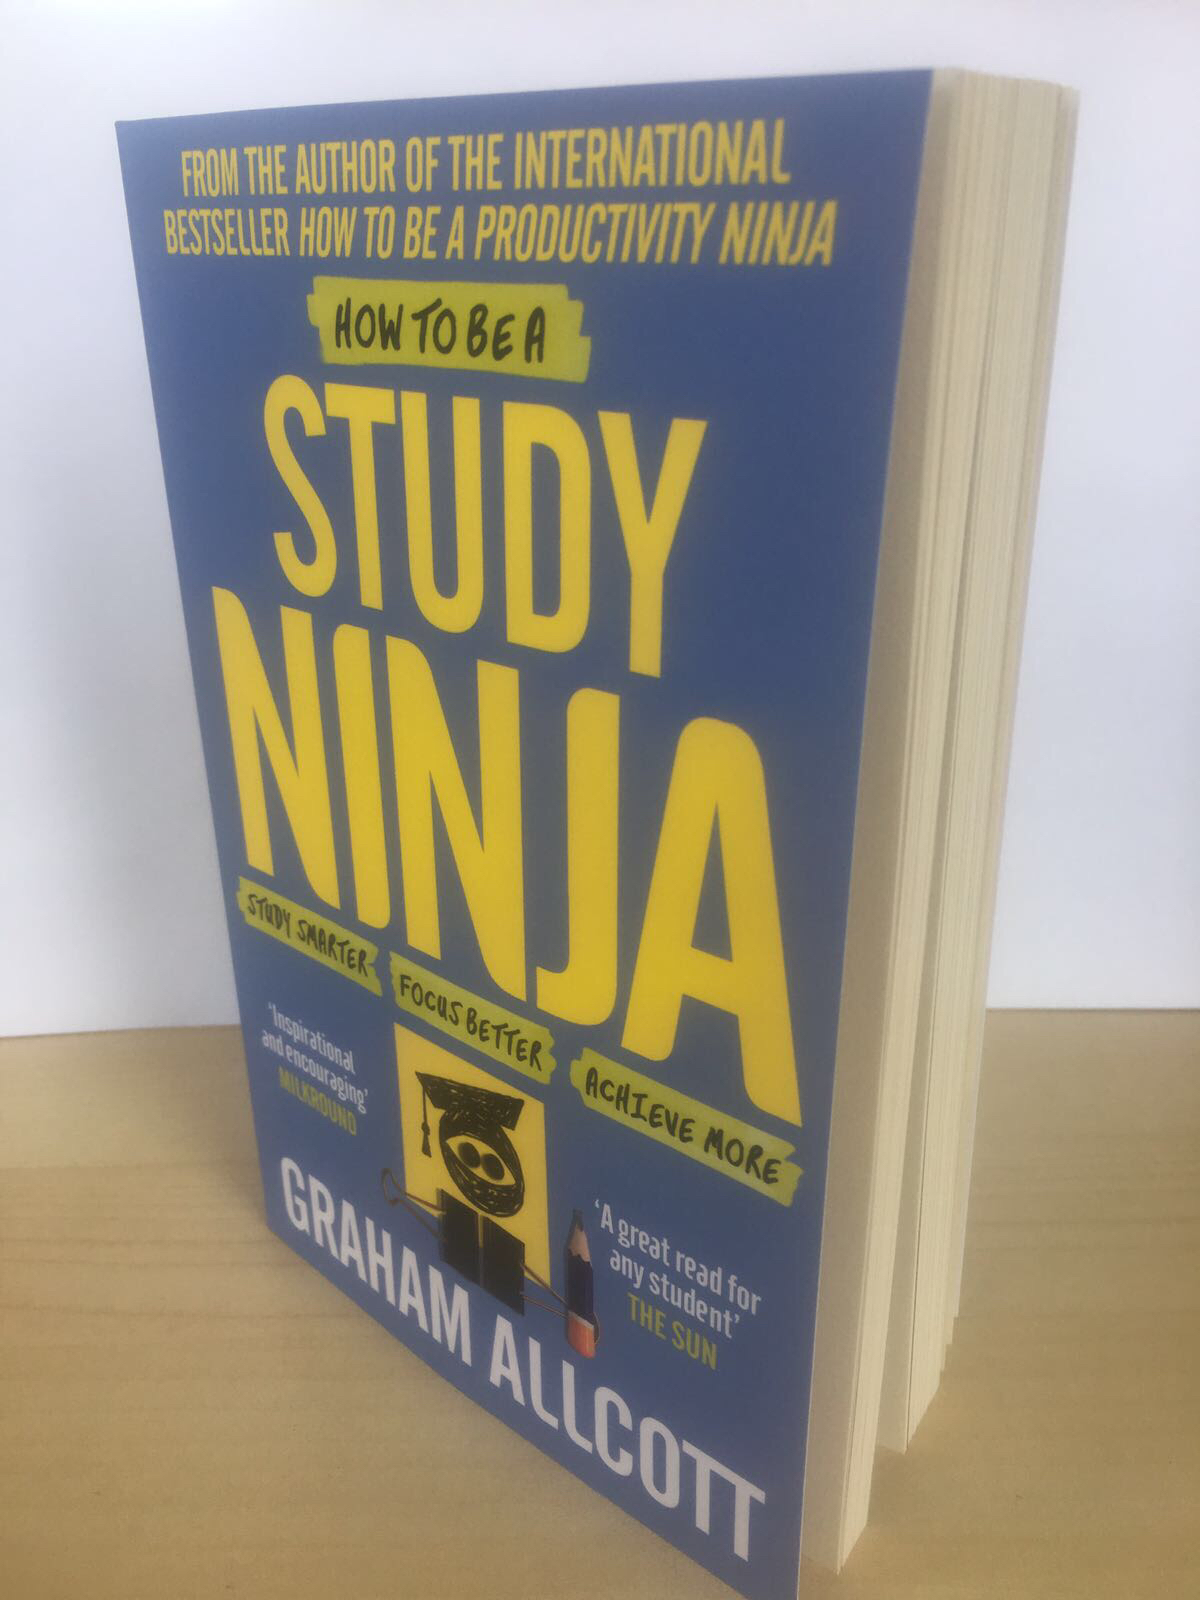 Announcement: How to Be a Knowledge Ninja Turns into How to be a Study Ninja